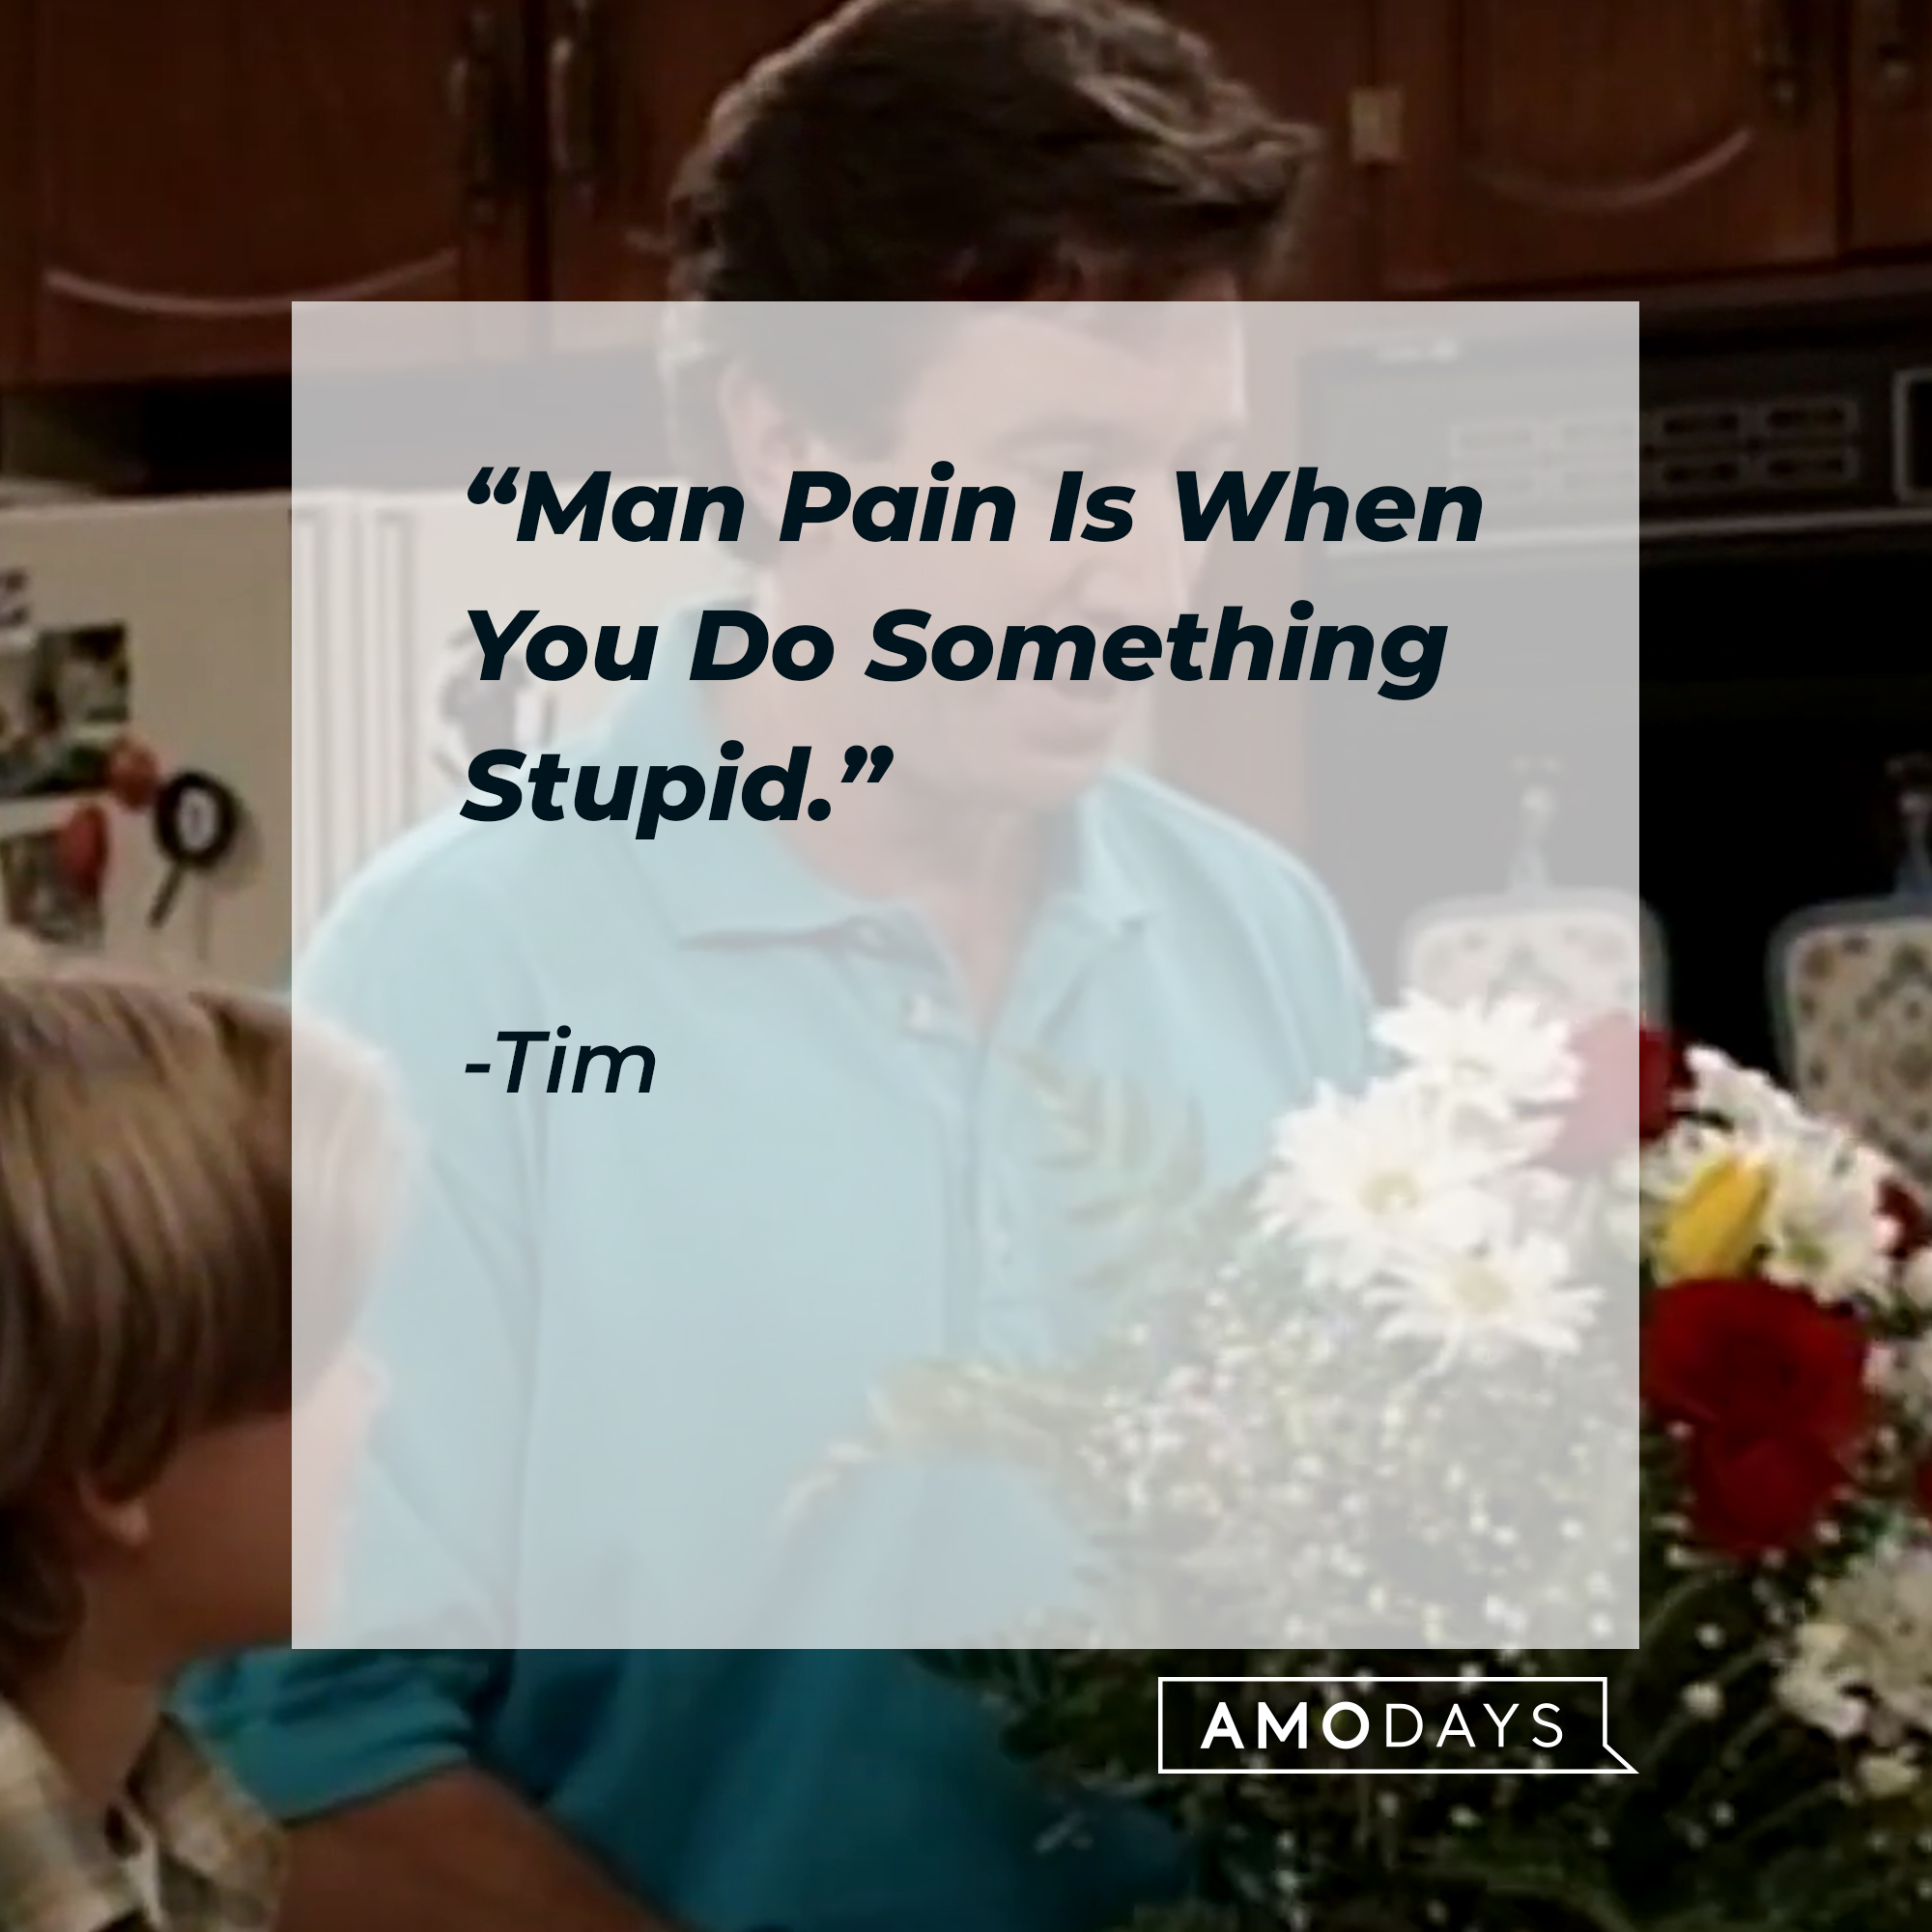 Tim's quote: “Man Pain Is When You Do Something Stupid.” | Source: youtube.com/ABCNetwork